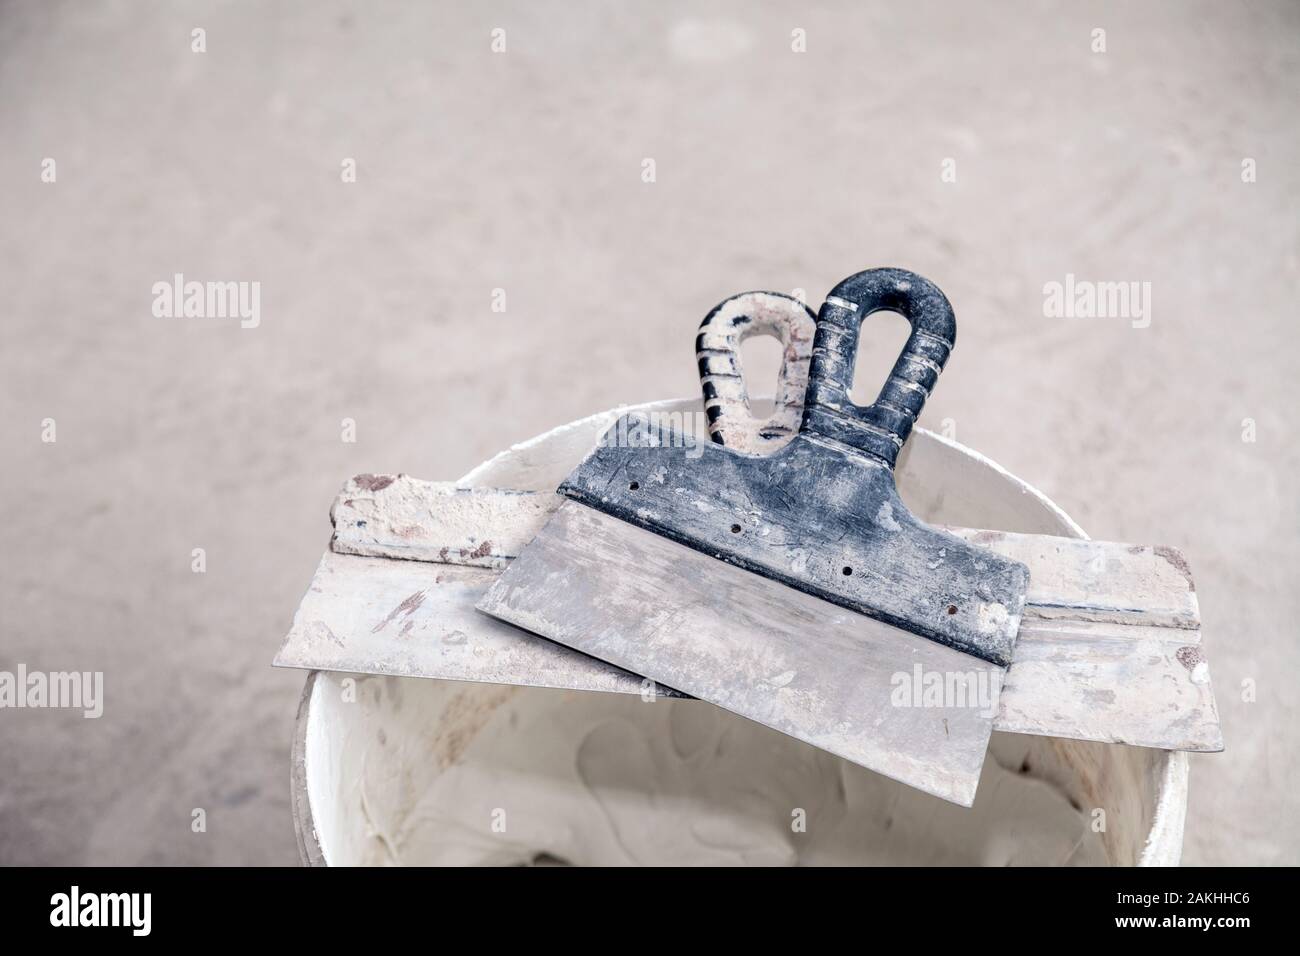 Decorative cement plaster and trowel in construction bucket ready for plastering. Spatula and a bucket of white putty. Top view Stock Photo